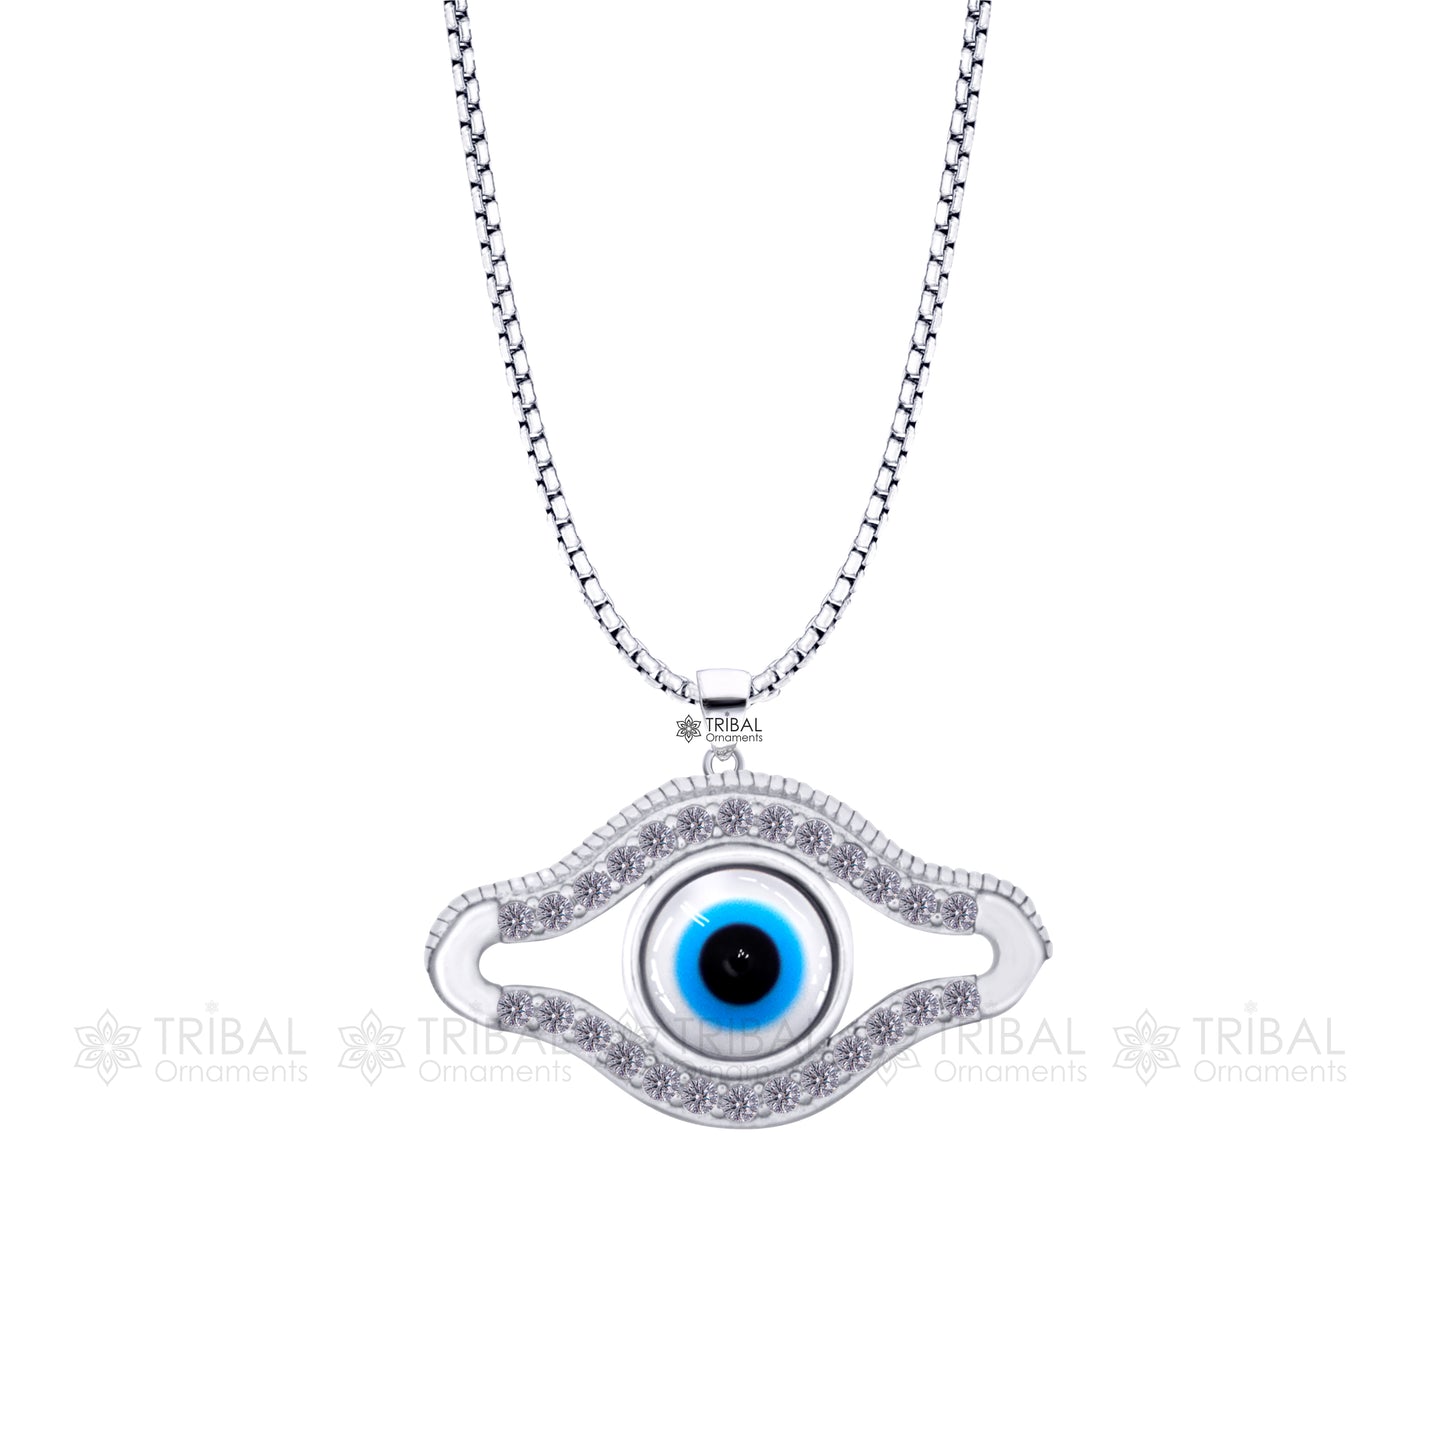 PURE 925 sterling silver evil eyes pendant with CZ stone nsp800